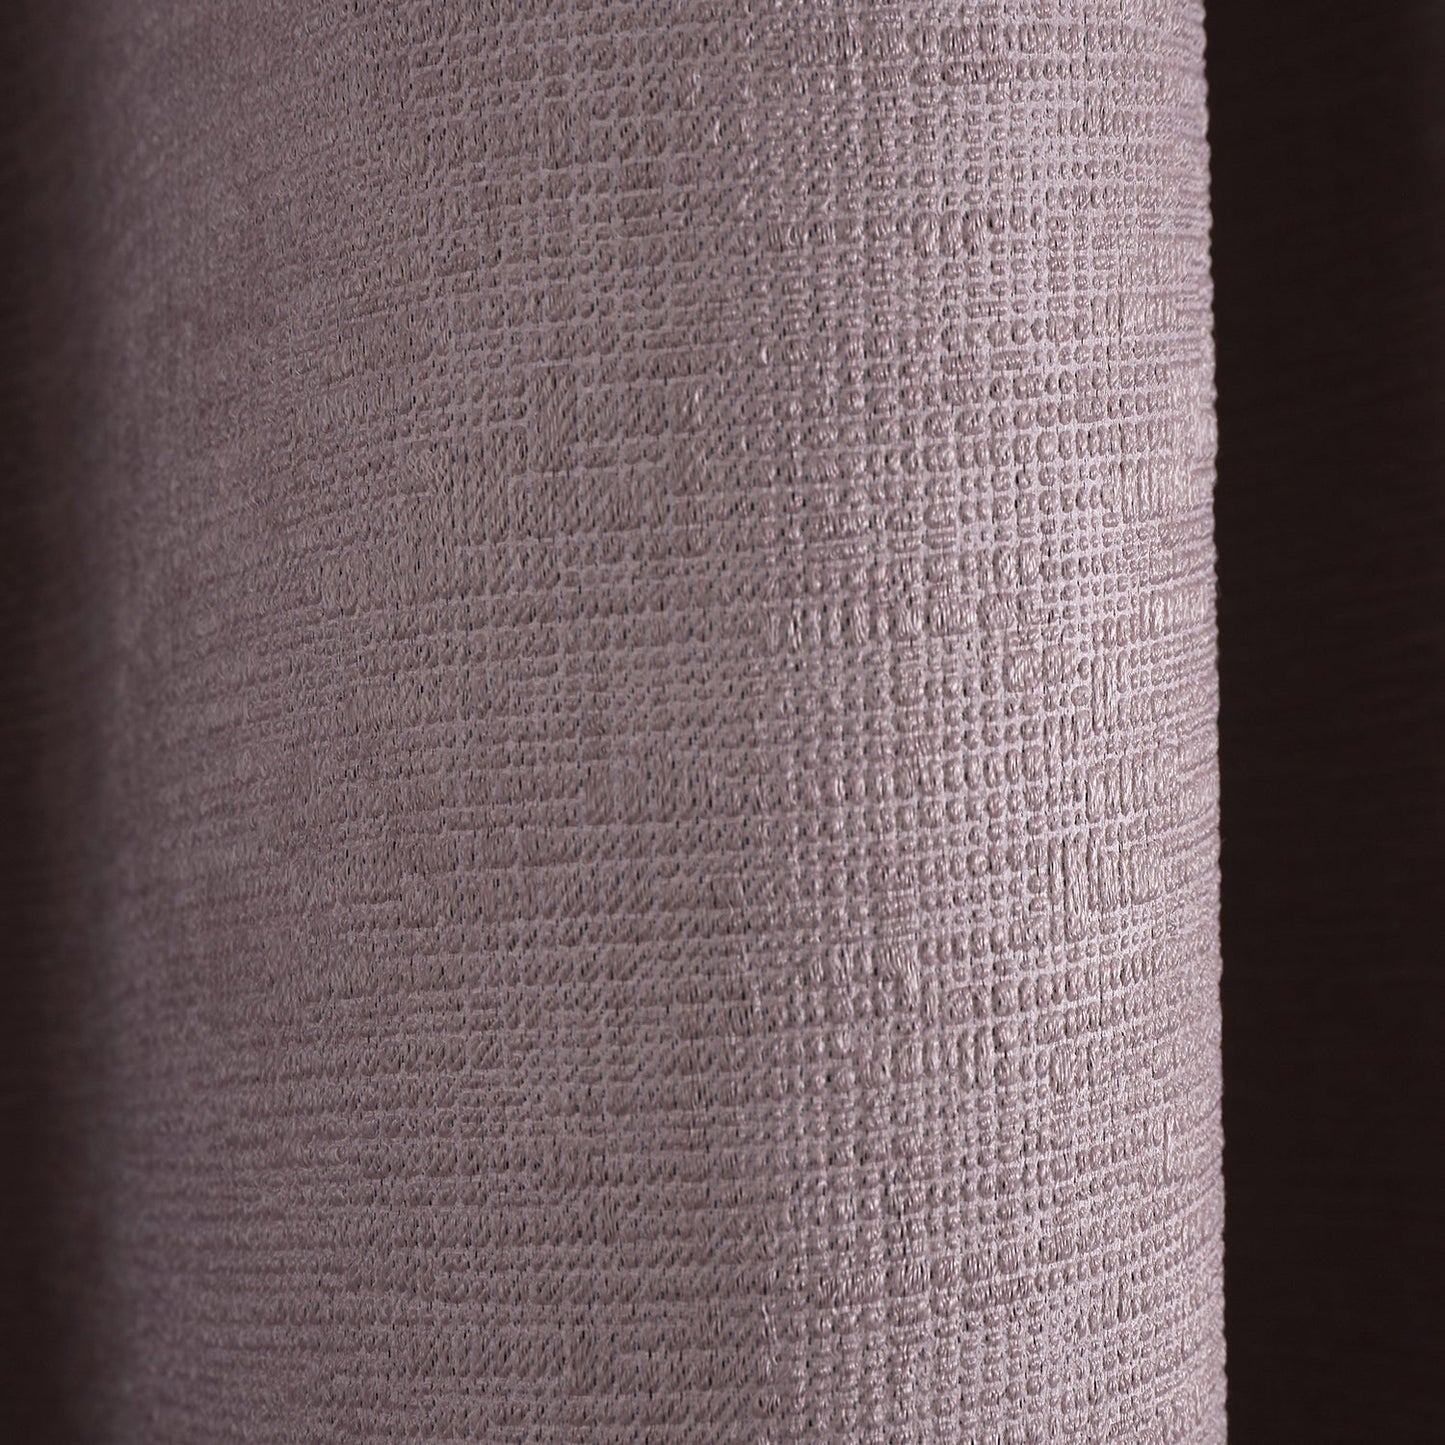 Strata Pink Dim Out Eyelet Curtains